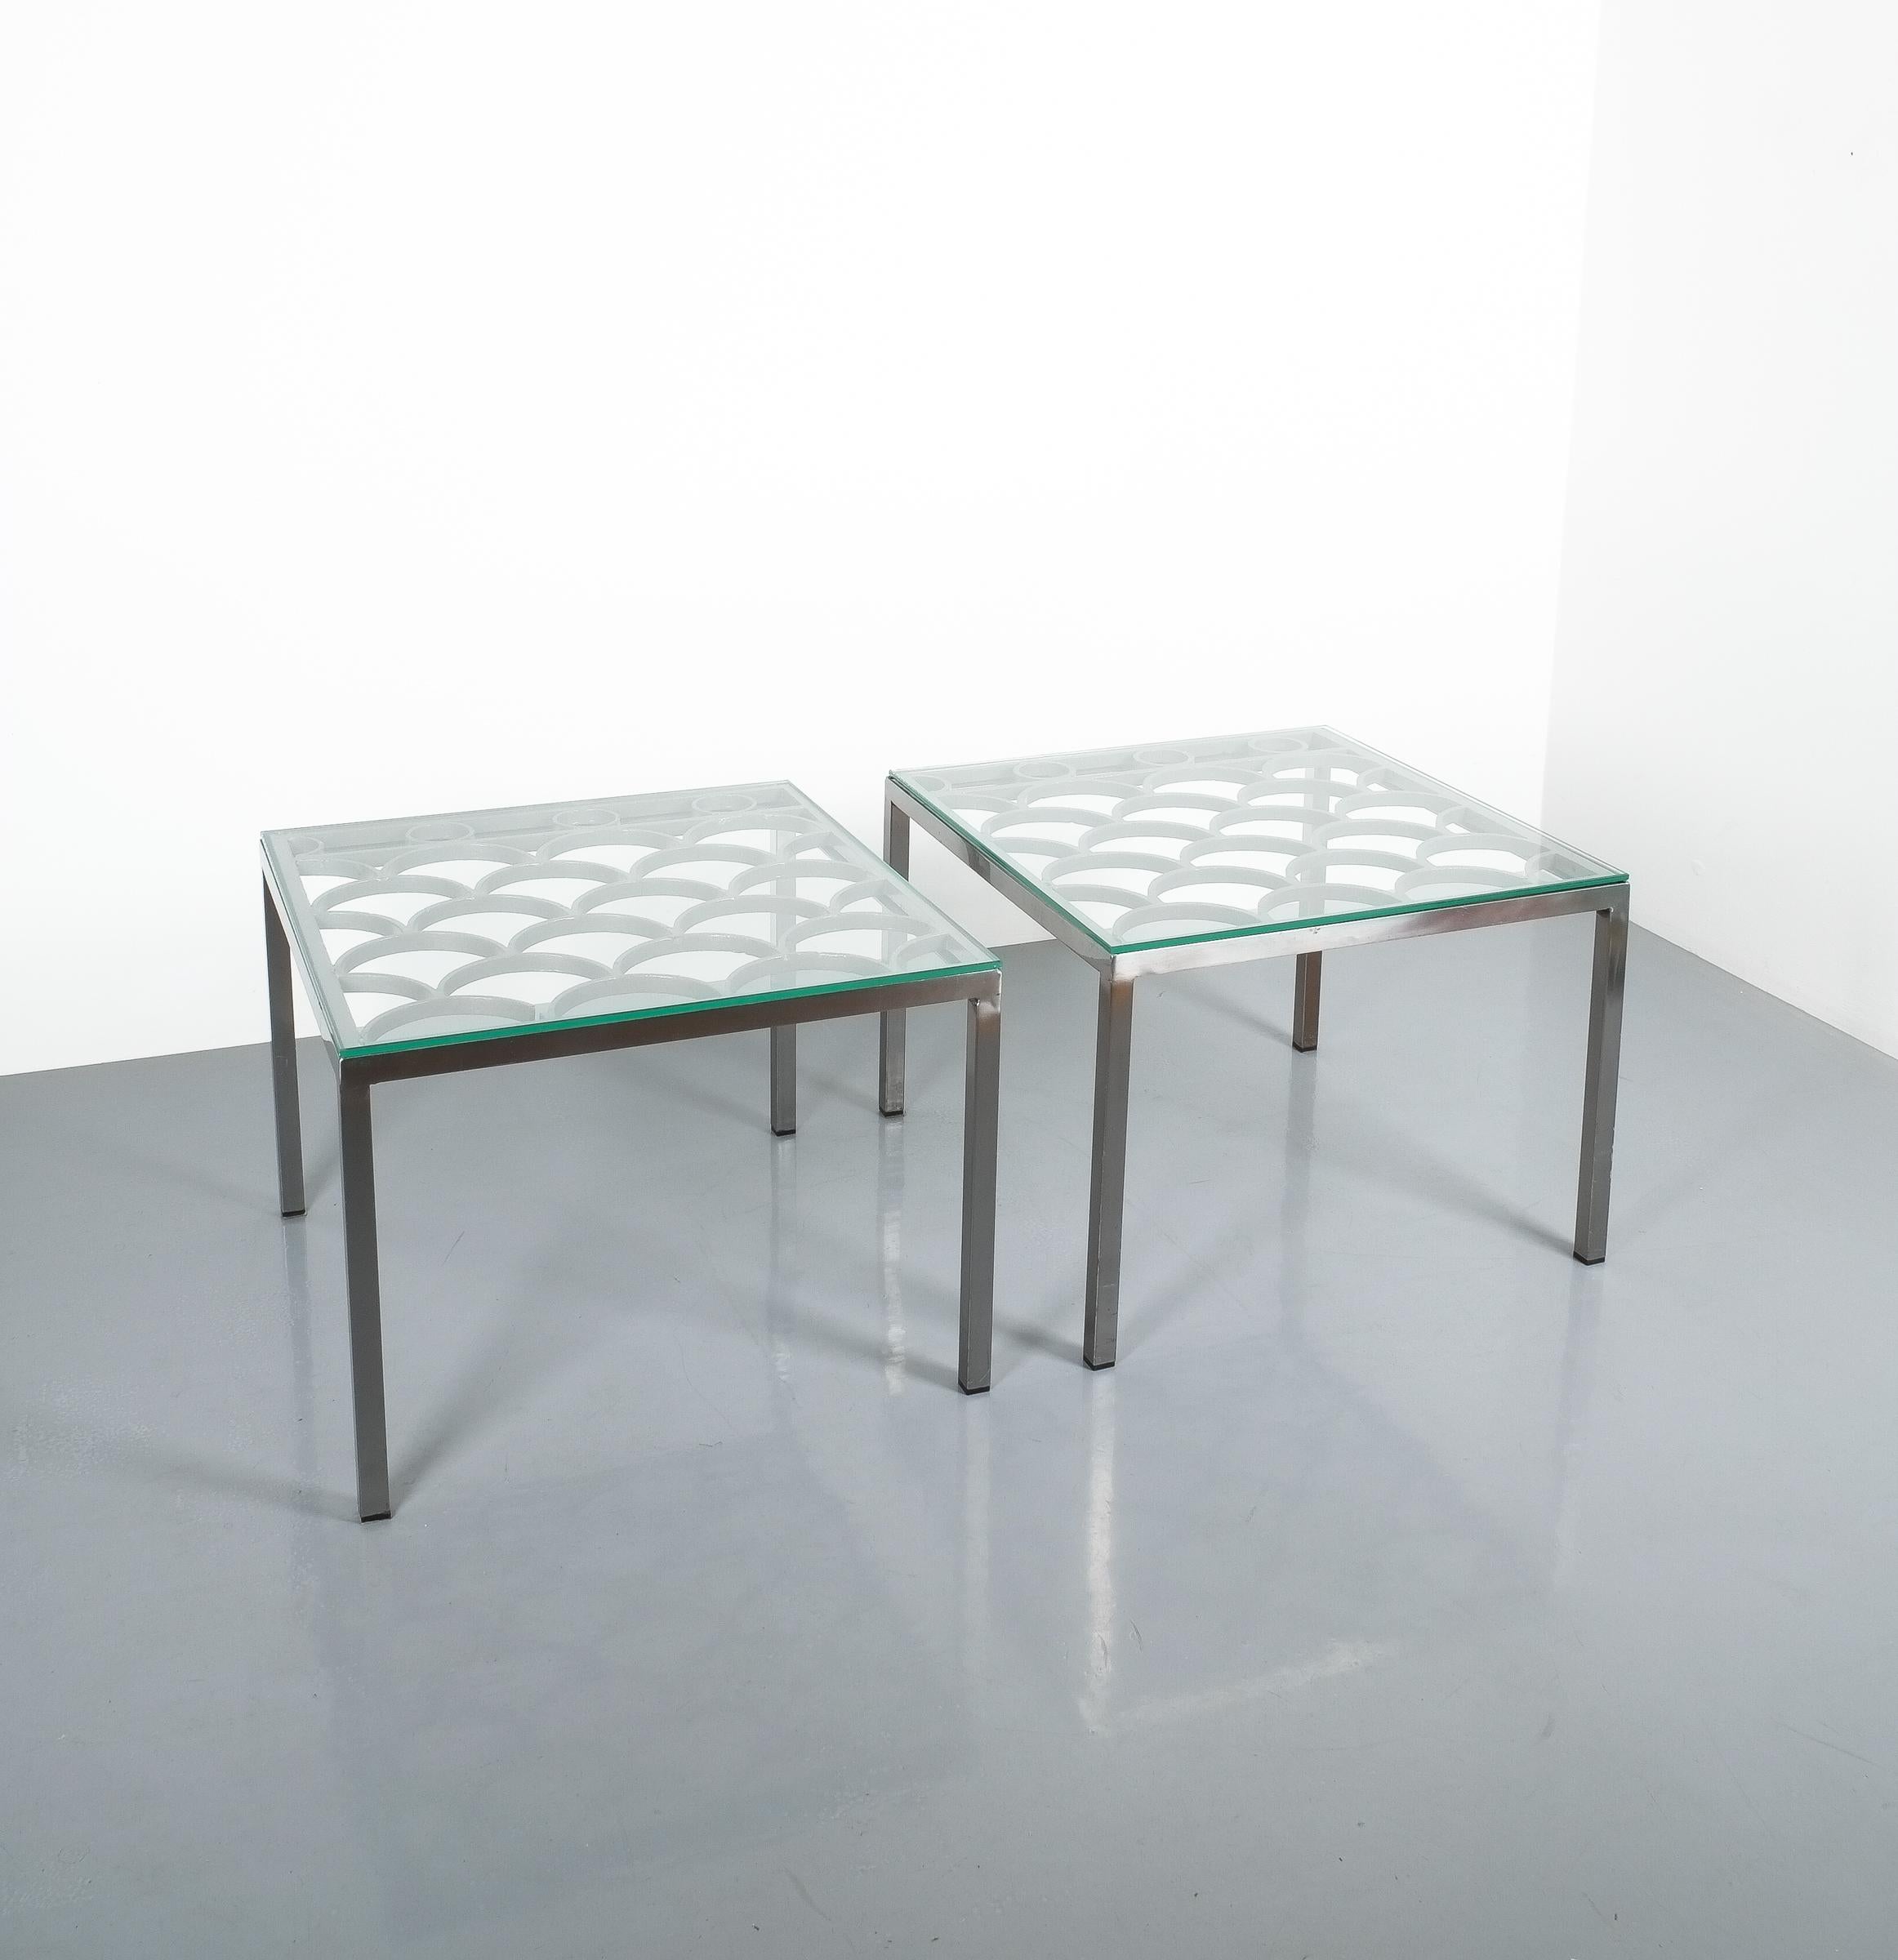 Forged Peter Preller Bespoke Wrought Iron Steel Side Tables, circa 1980